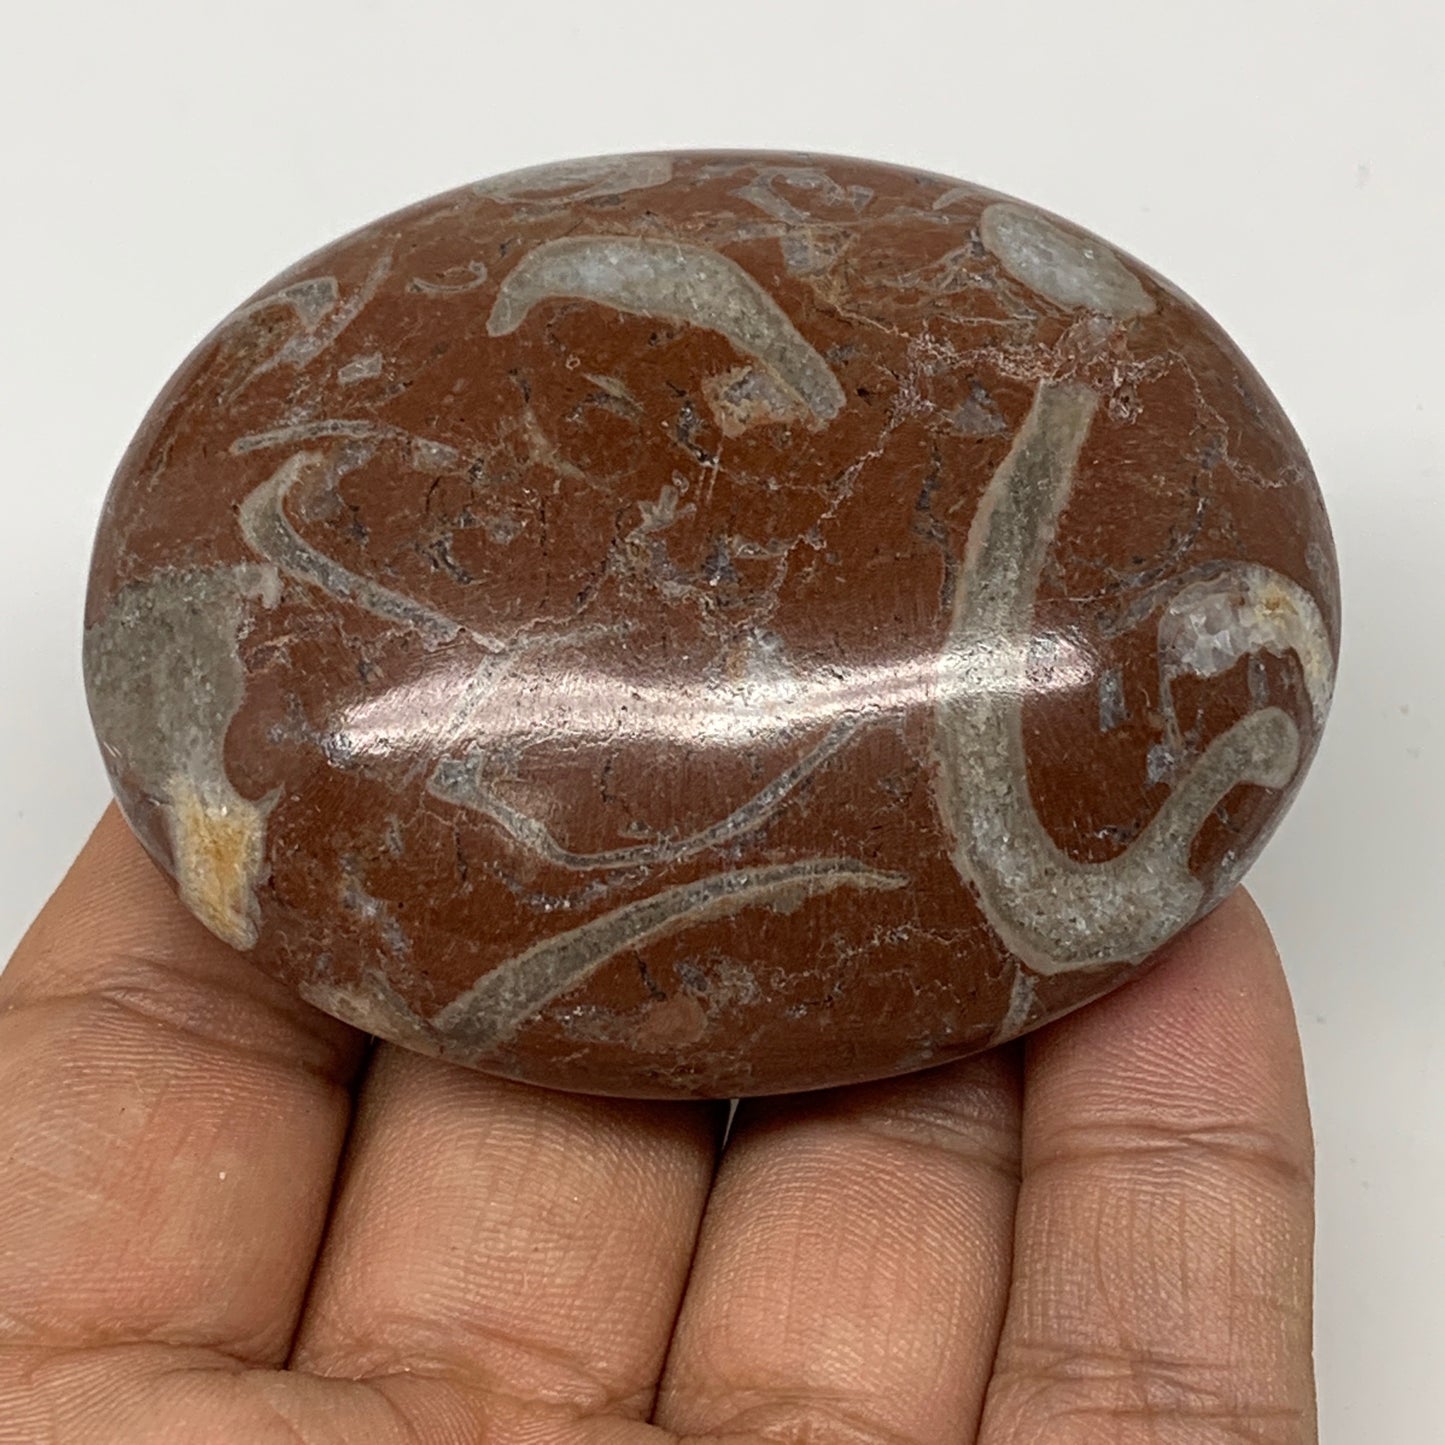 129g, 2.6"x2.1"x1", Natural Untreated Red Shell Fossils Oval Palms-tone, F1259